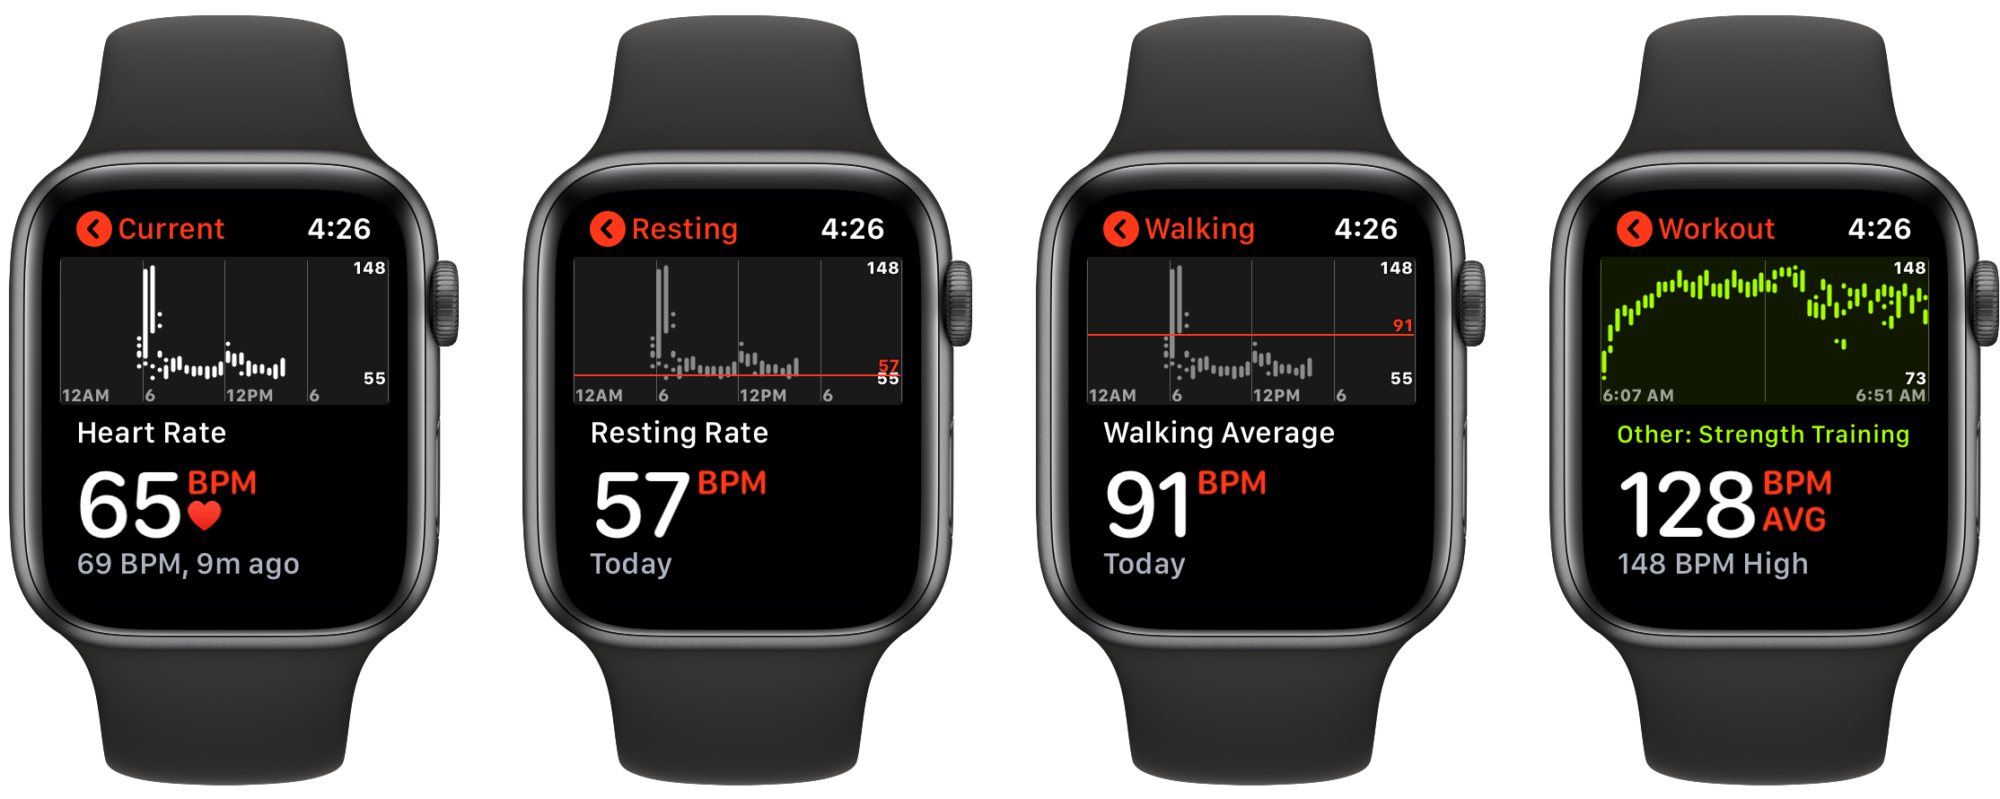 How To Change Exercise Heart Rate On Apple Watch 1